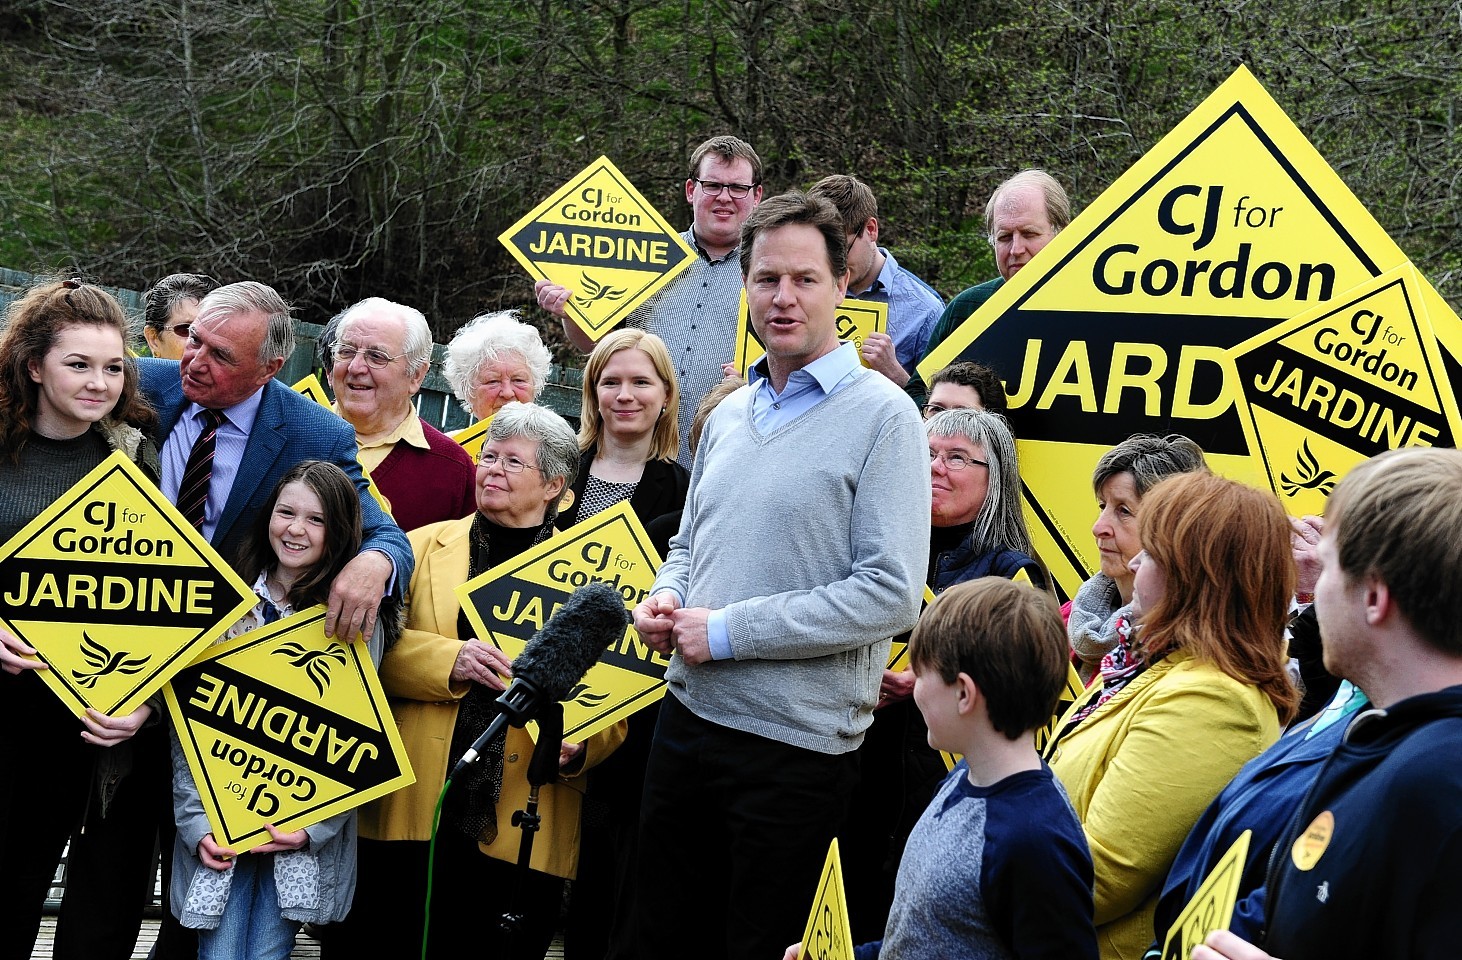 Deputy Prime Minister and Lib Dem Leader Nick Clegg in the Gordon constituency to campaign with Lib Dem candidate Christine Jardine, picture by Kami Thomson